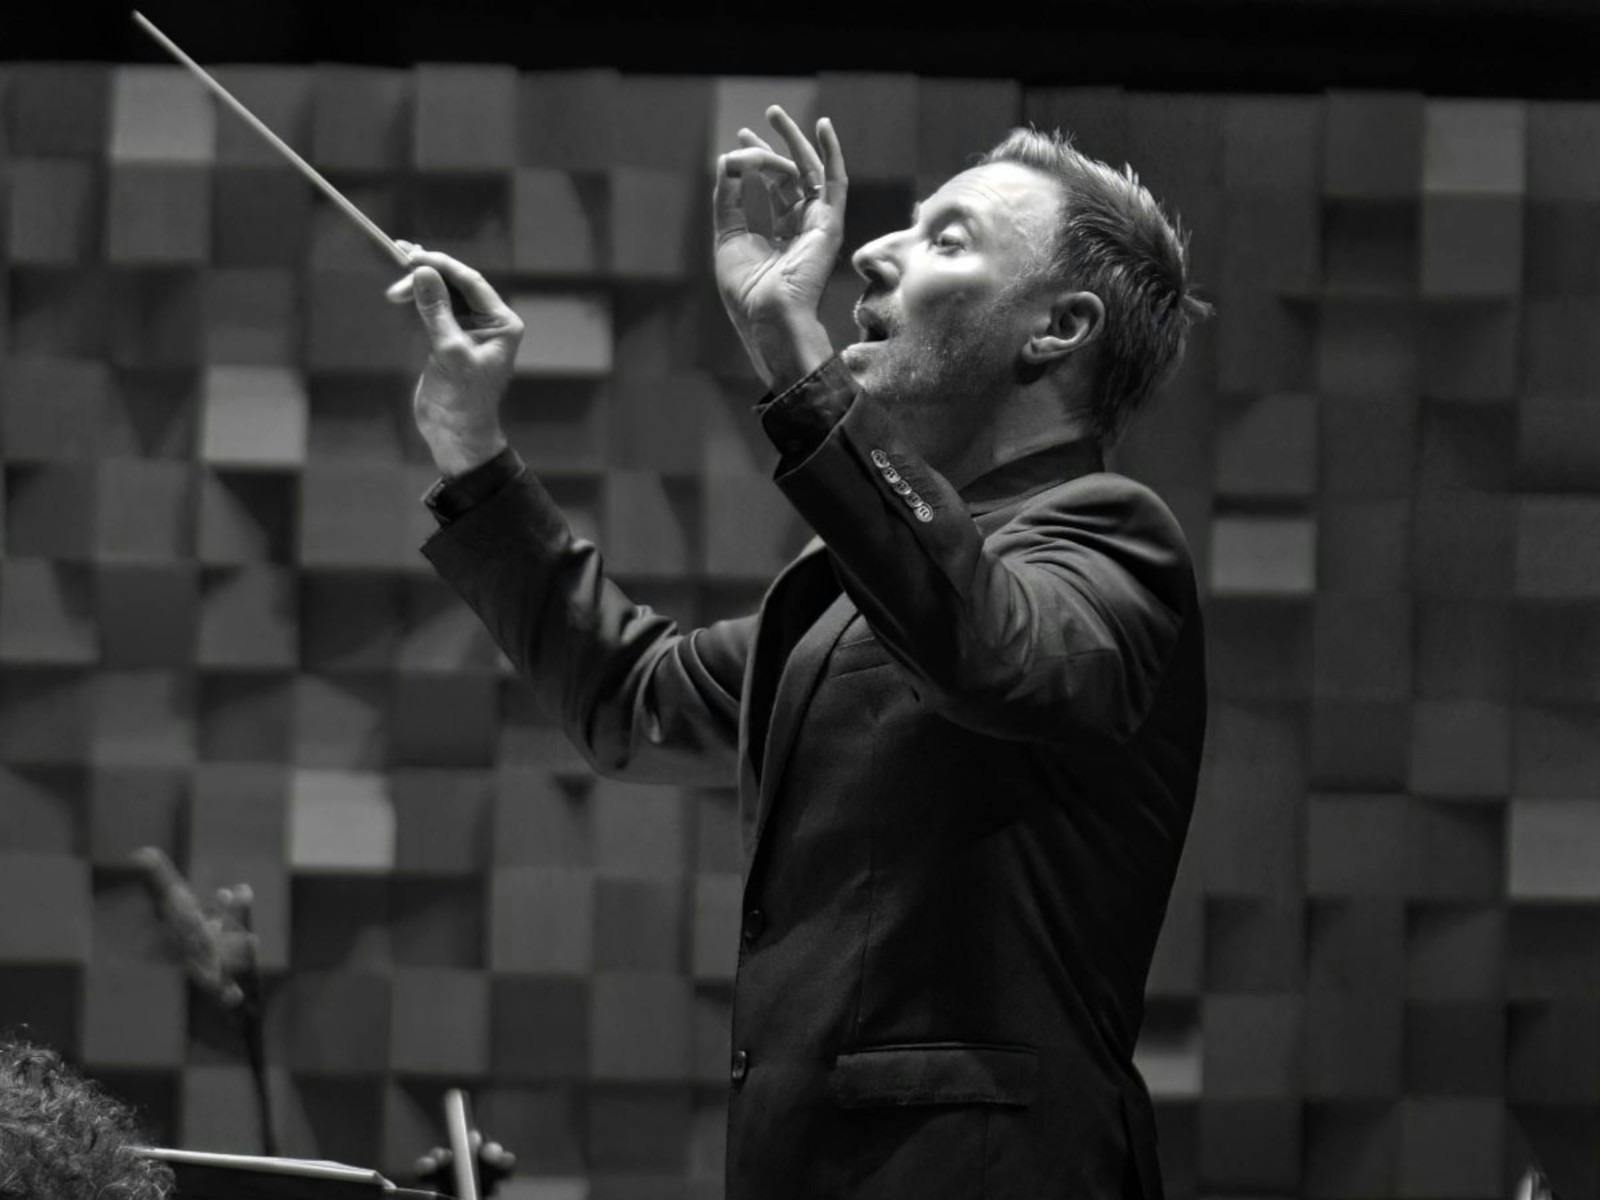 Monochrome image of a conductor, holding a baton, with his hands in the air.